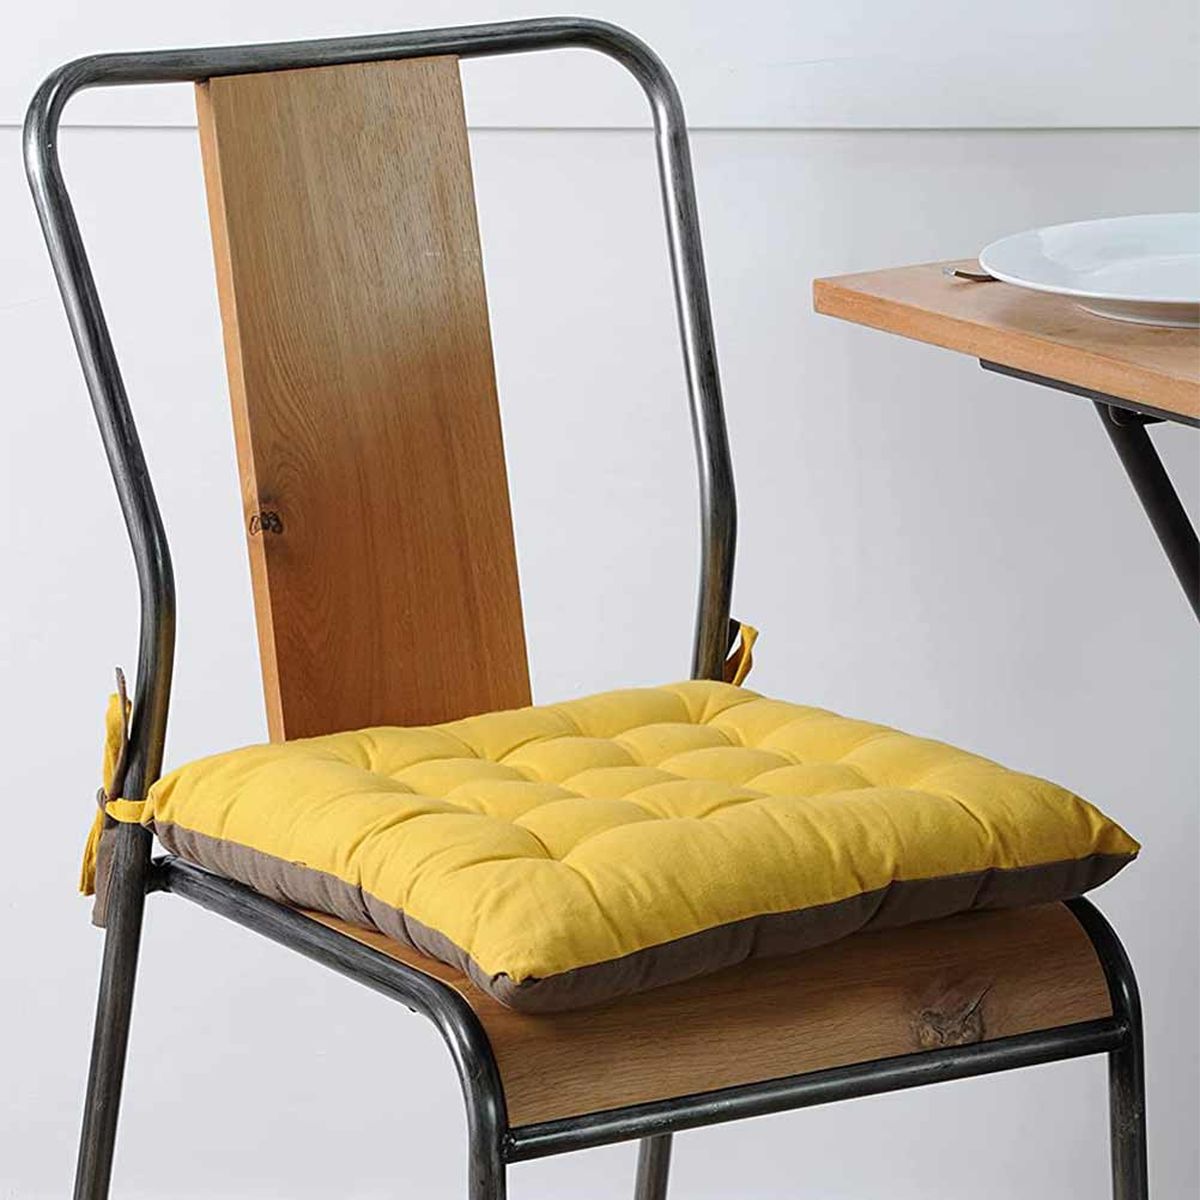 chair cushion - 2 sides - Brown and Yellow 40 cm